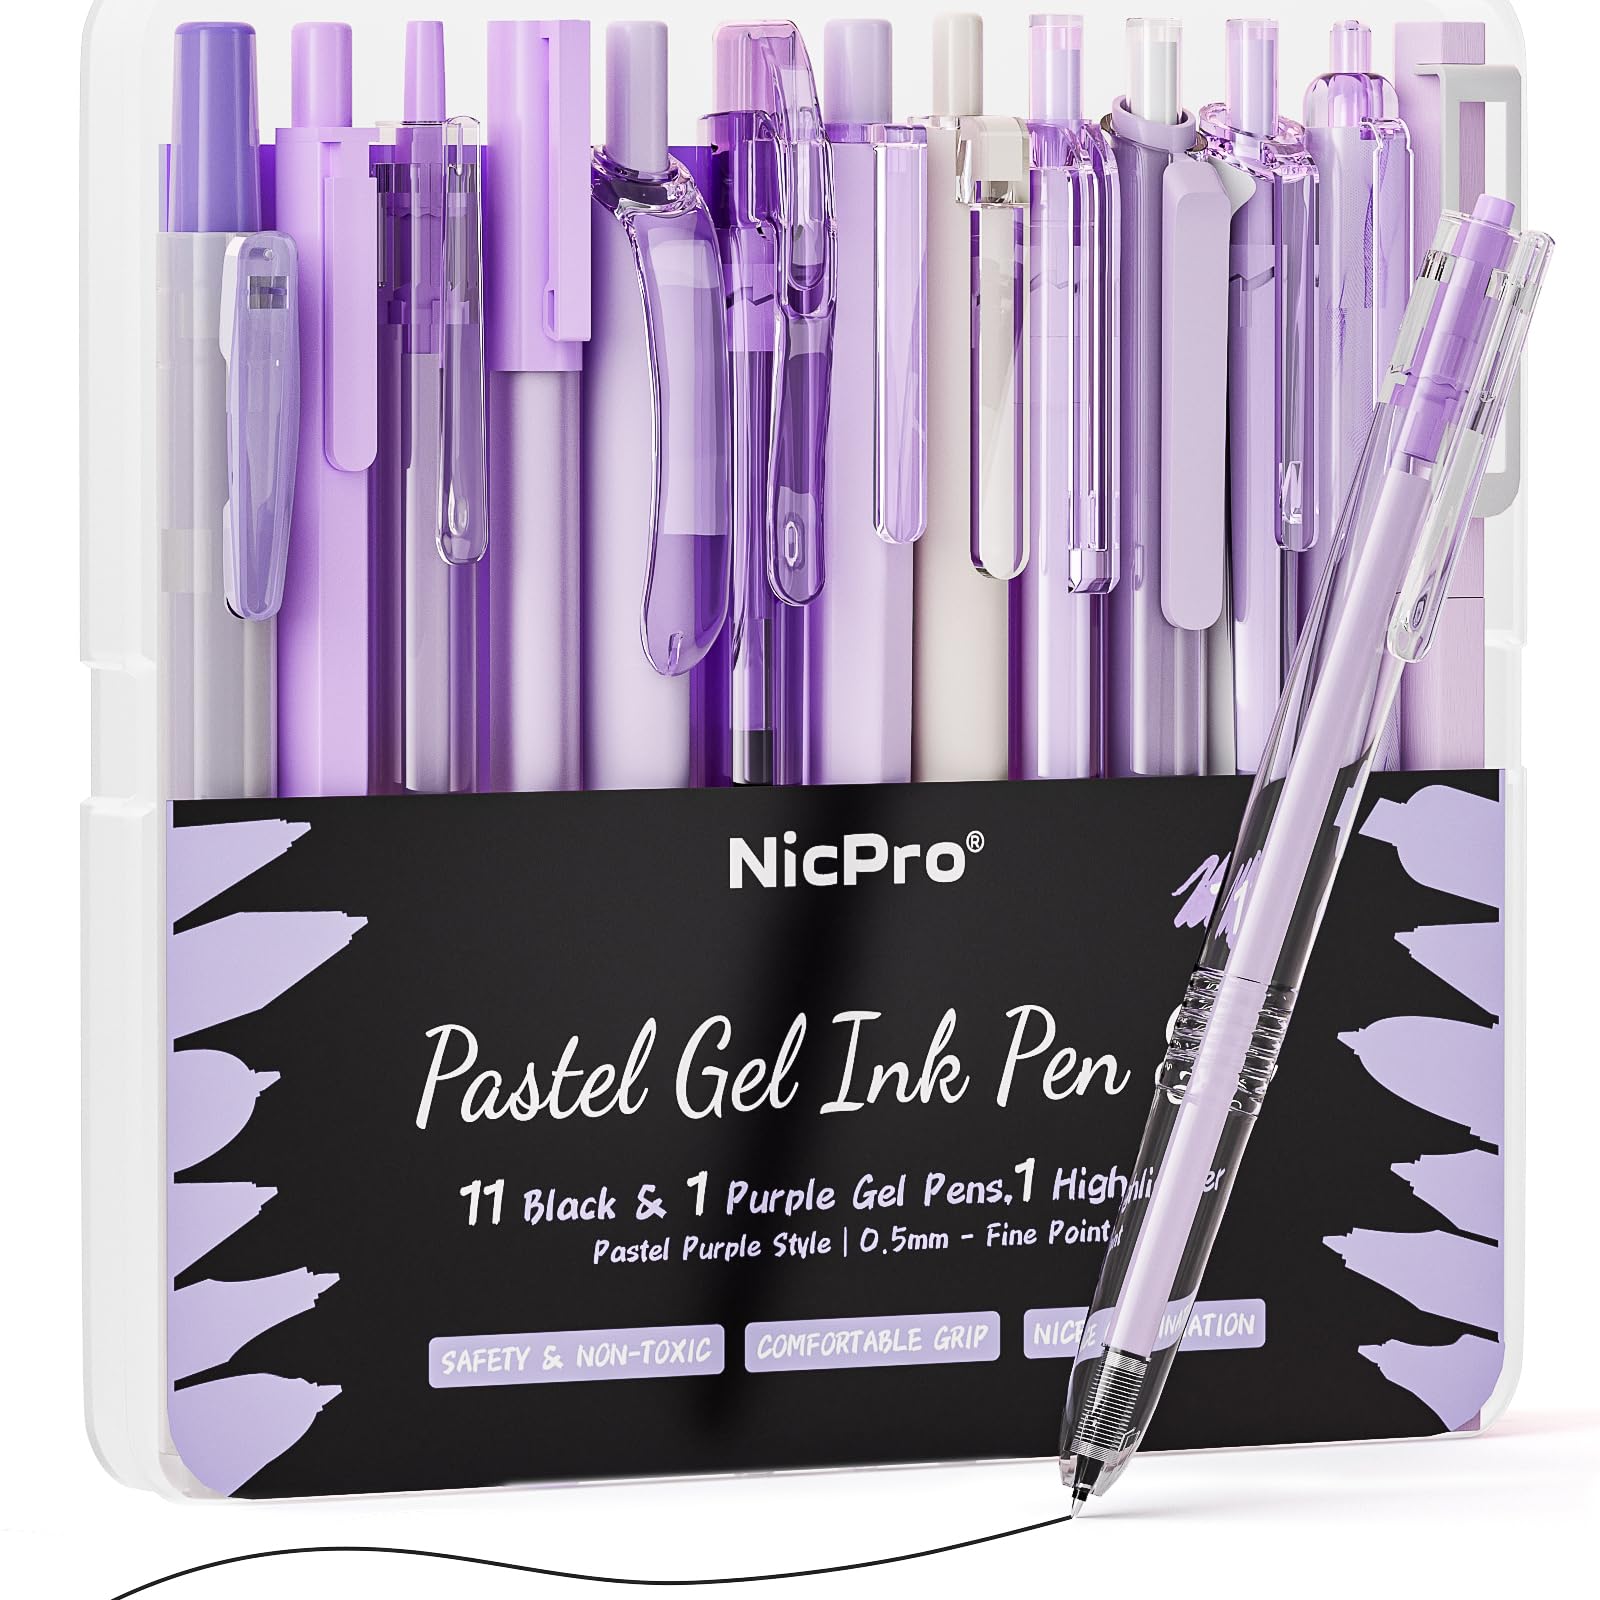 Nicpro 13PCS Pastel Gel Ink Pen Set with Case, Cute Retractable 0.5mm Fine Point 12PCS Black Ink Pens with 1 Highlighter, Aesthetic Pens for School, Student Note Taking,Writing,Office Supplies(Purple)